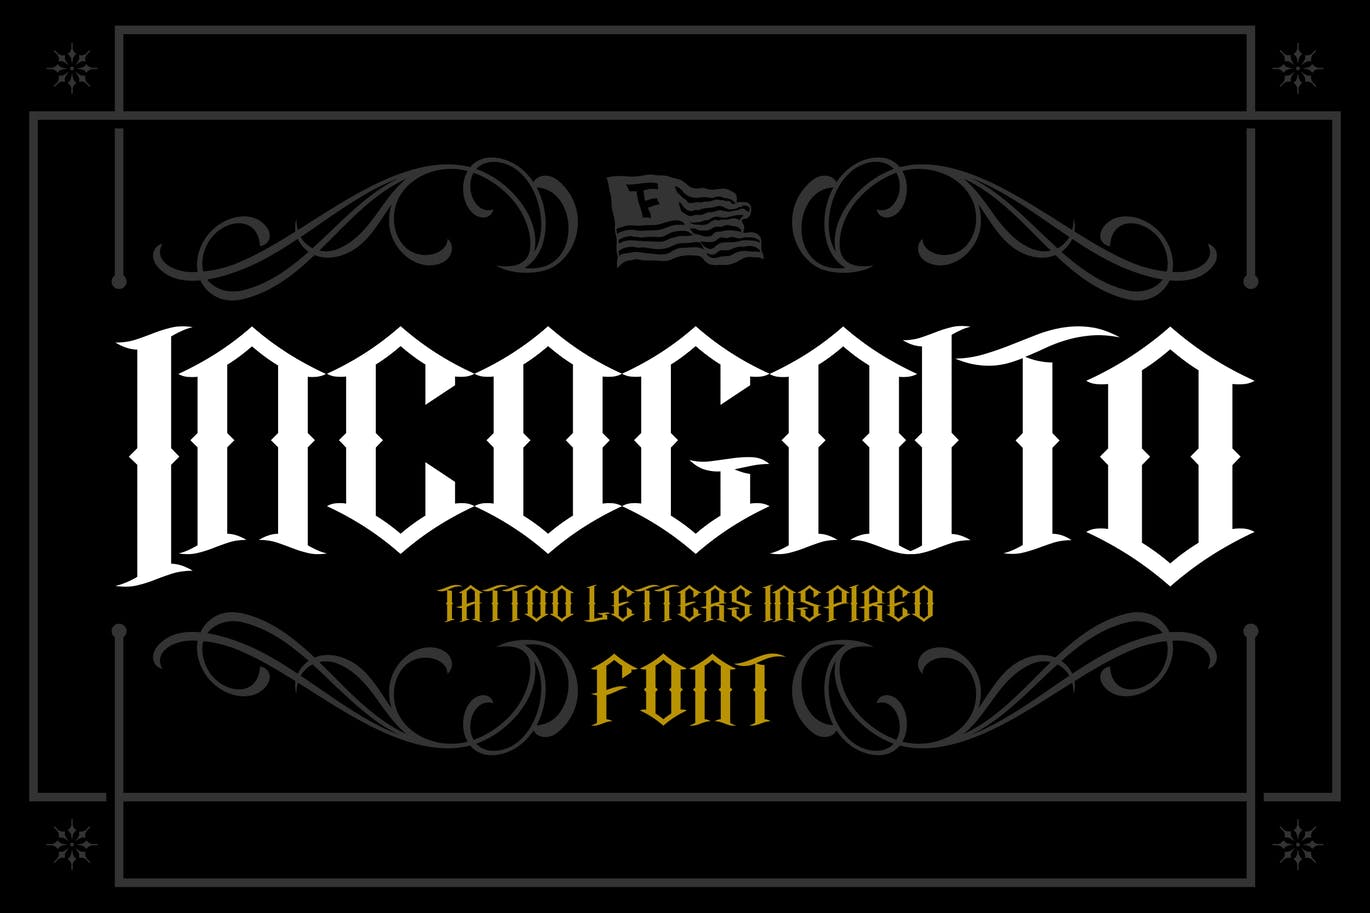 A tattoo letters inspired font